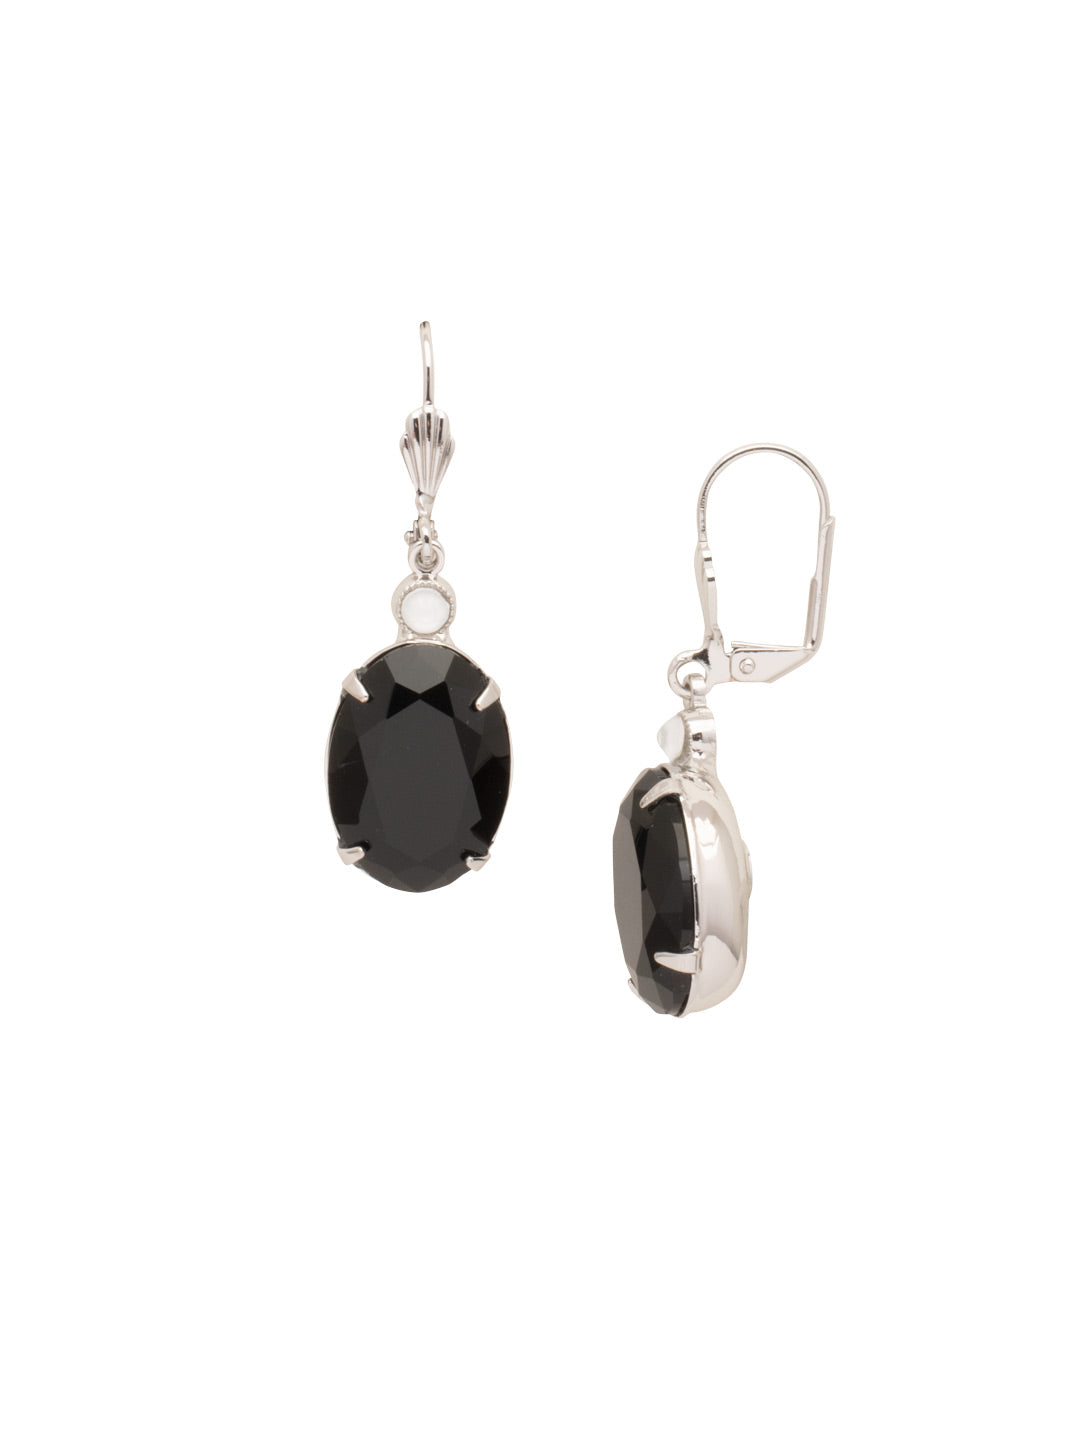 Leslie Decorated Dangle Earring - ECY58PDSNI - <p>Soften your look with sparkle! This french wire earring features a large oval crystal accented by a petite stone, which creates a perfect, everyday silhouette. From Sorrelli's Starry Night collection in our Palladium finish.</p>